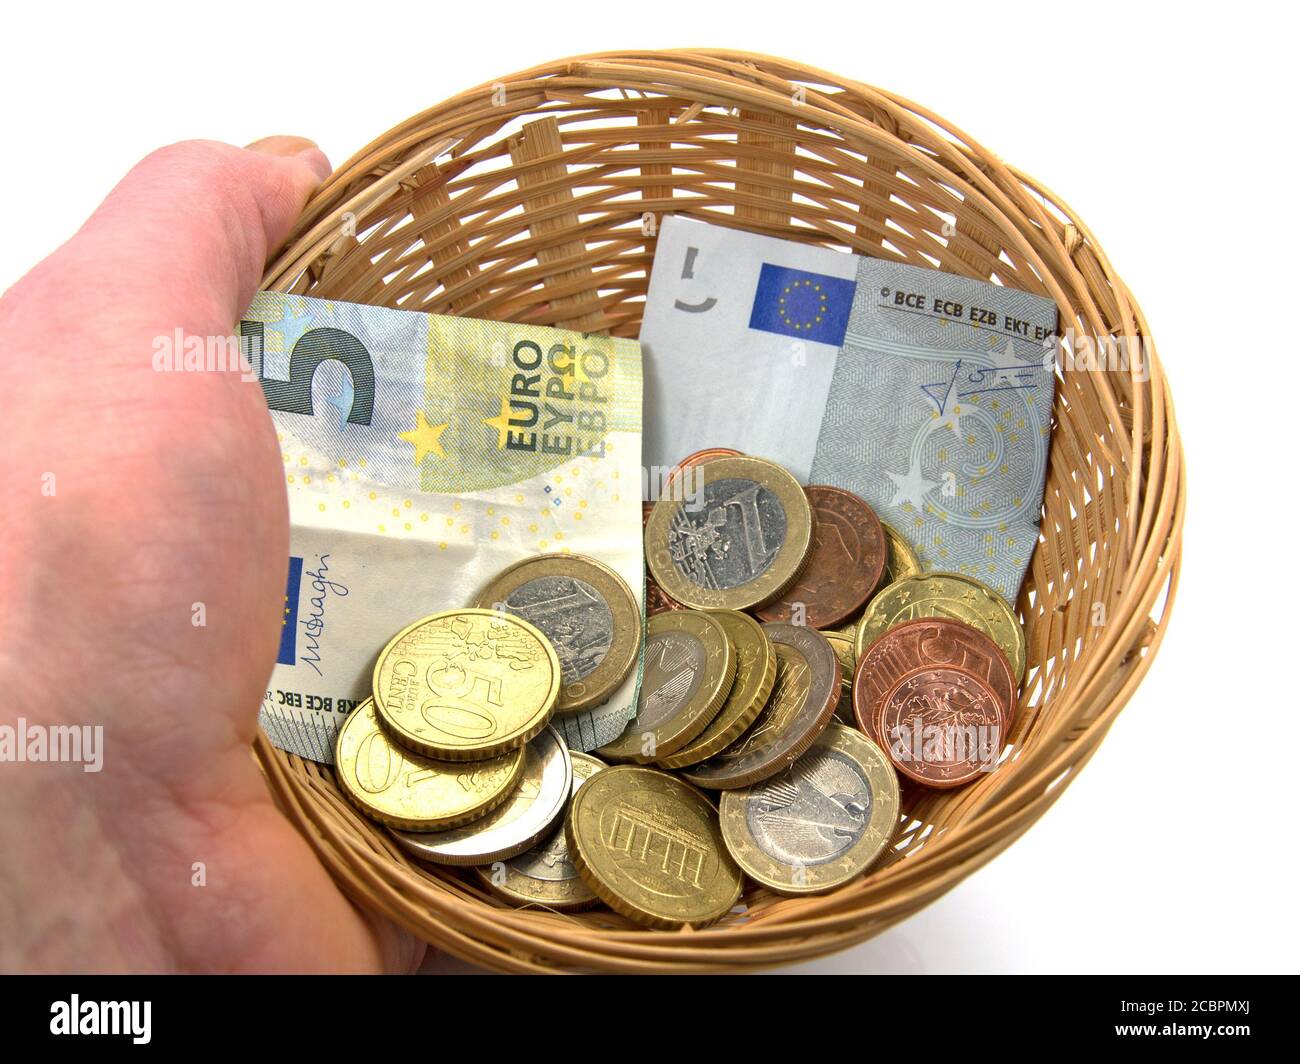 Hand holding a basket for collecting money Stock Photo